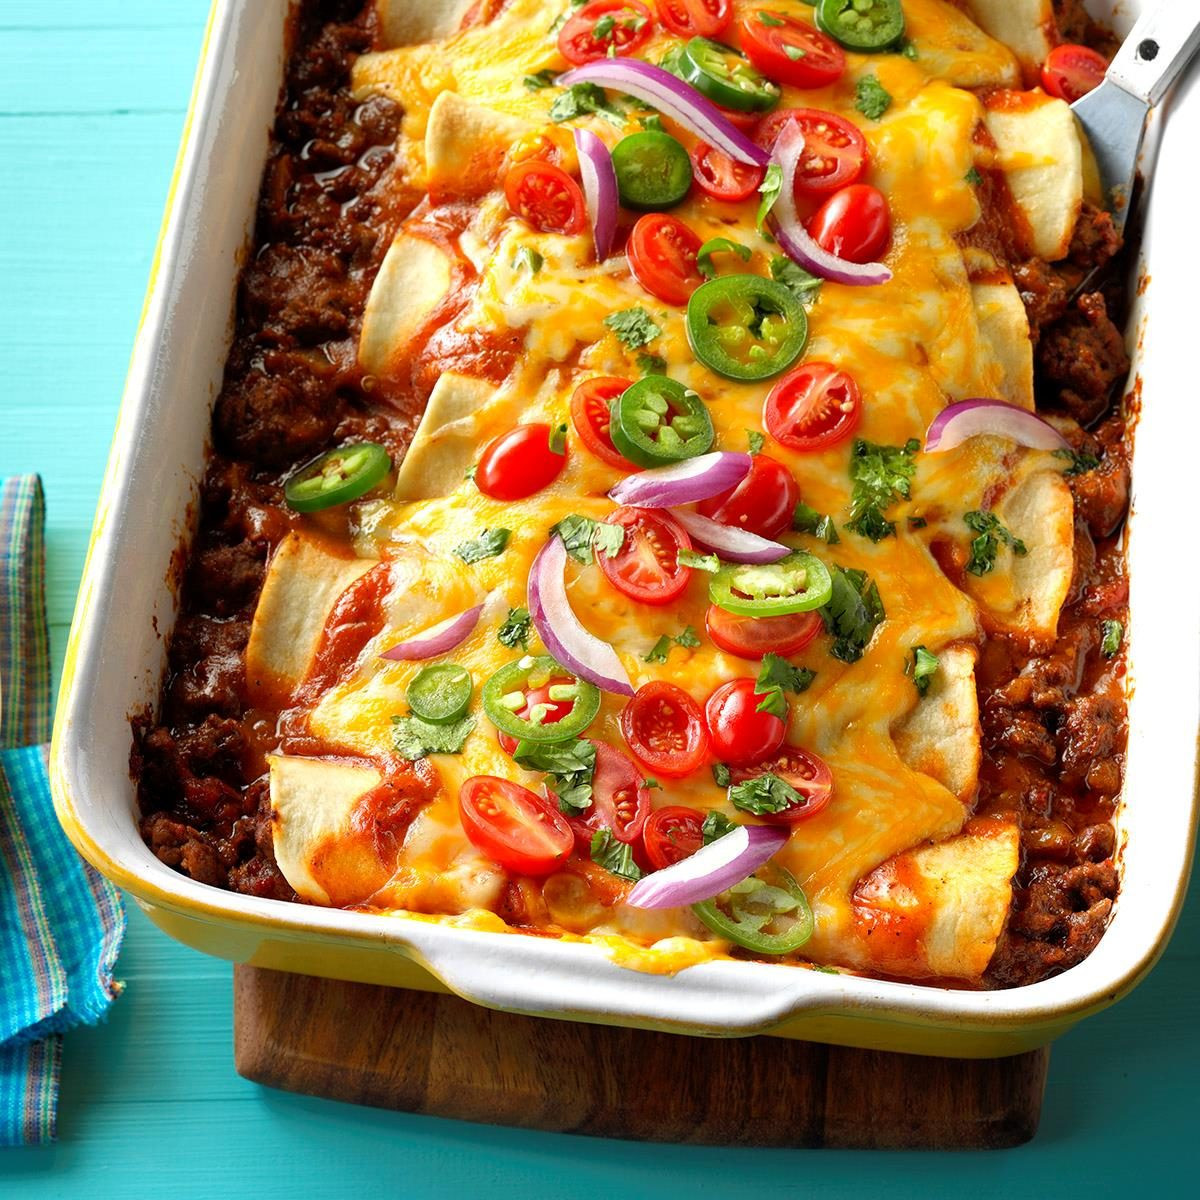 Best 24 Mexican Food Ideas for Dinner Party - Home, Family, Style and ...